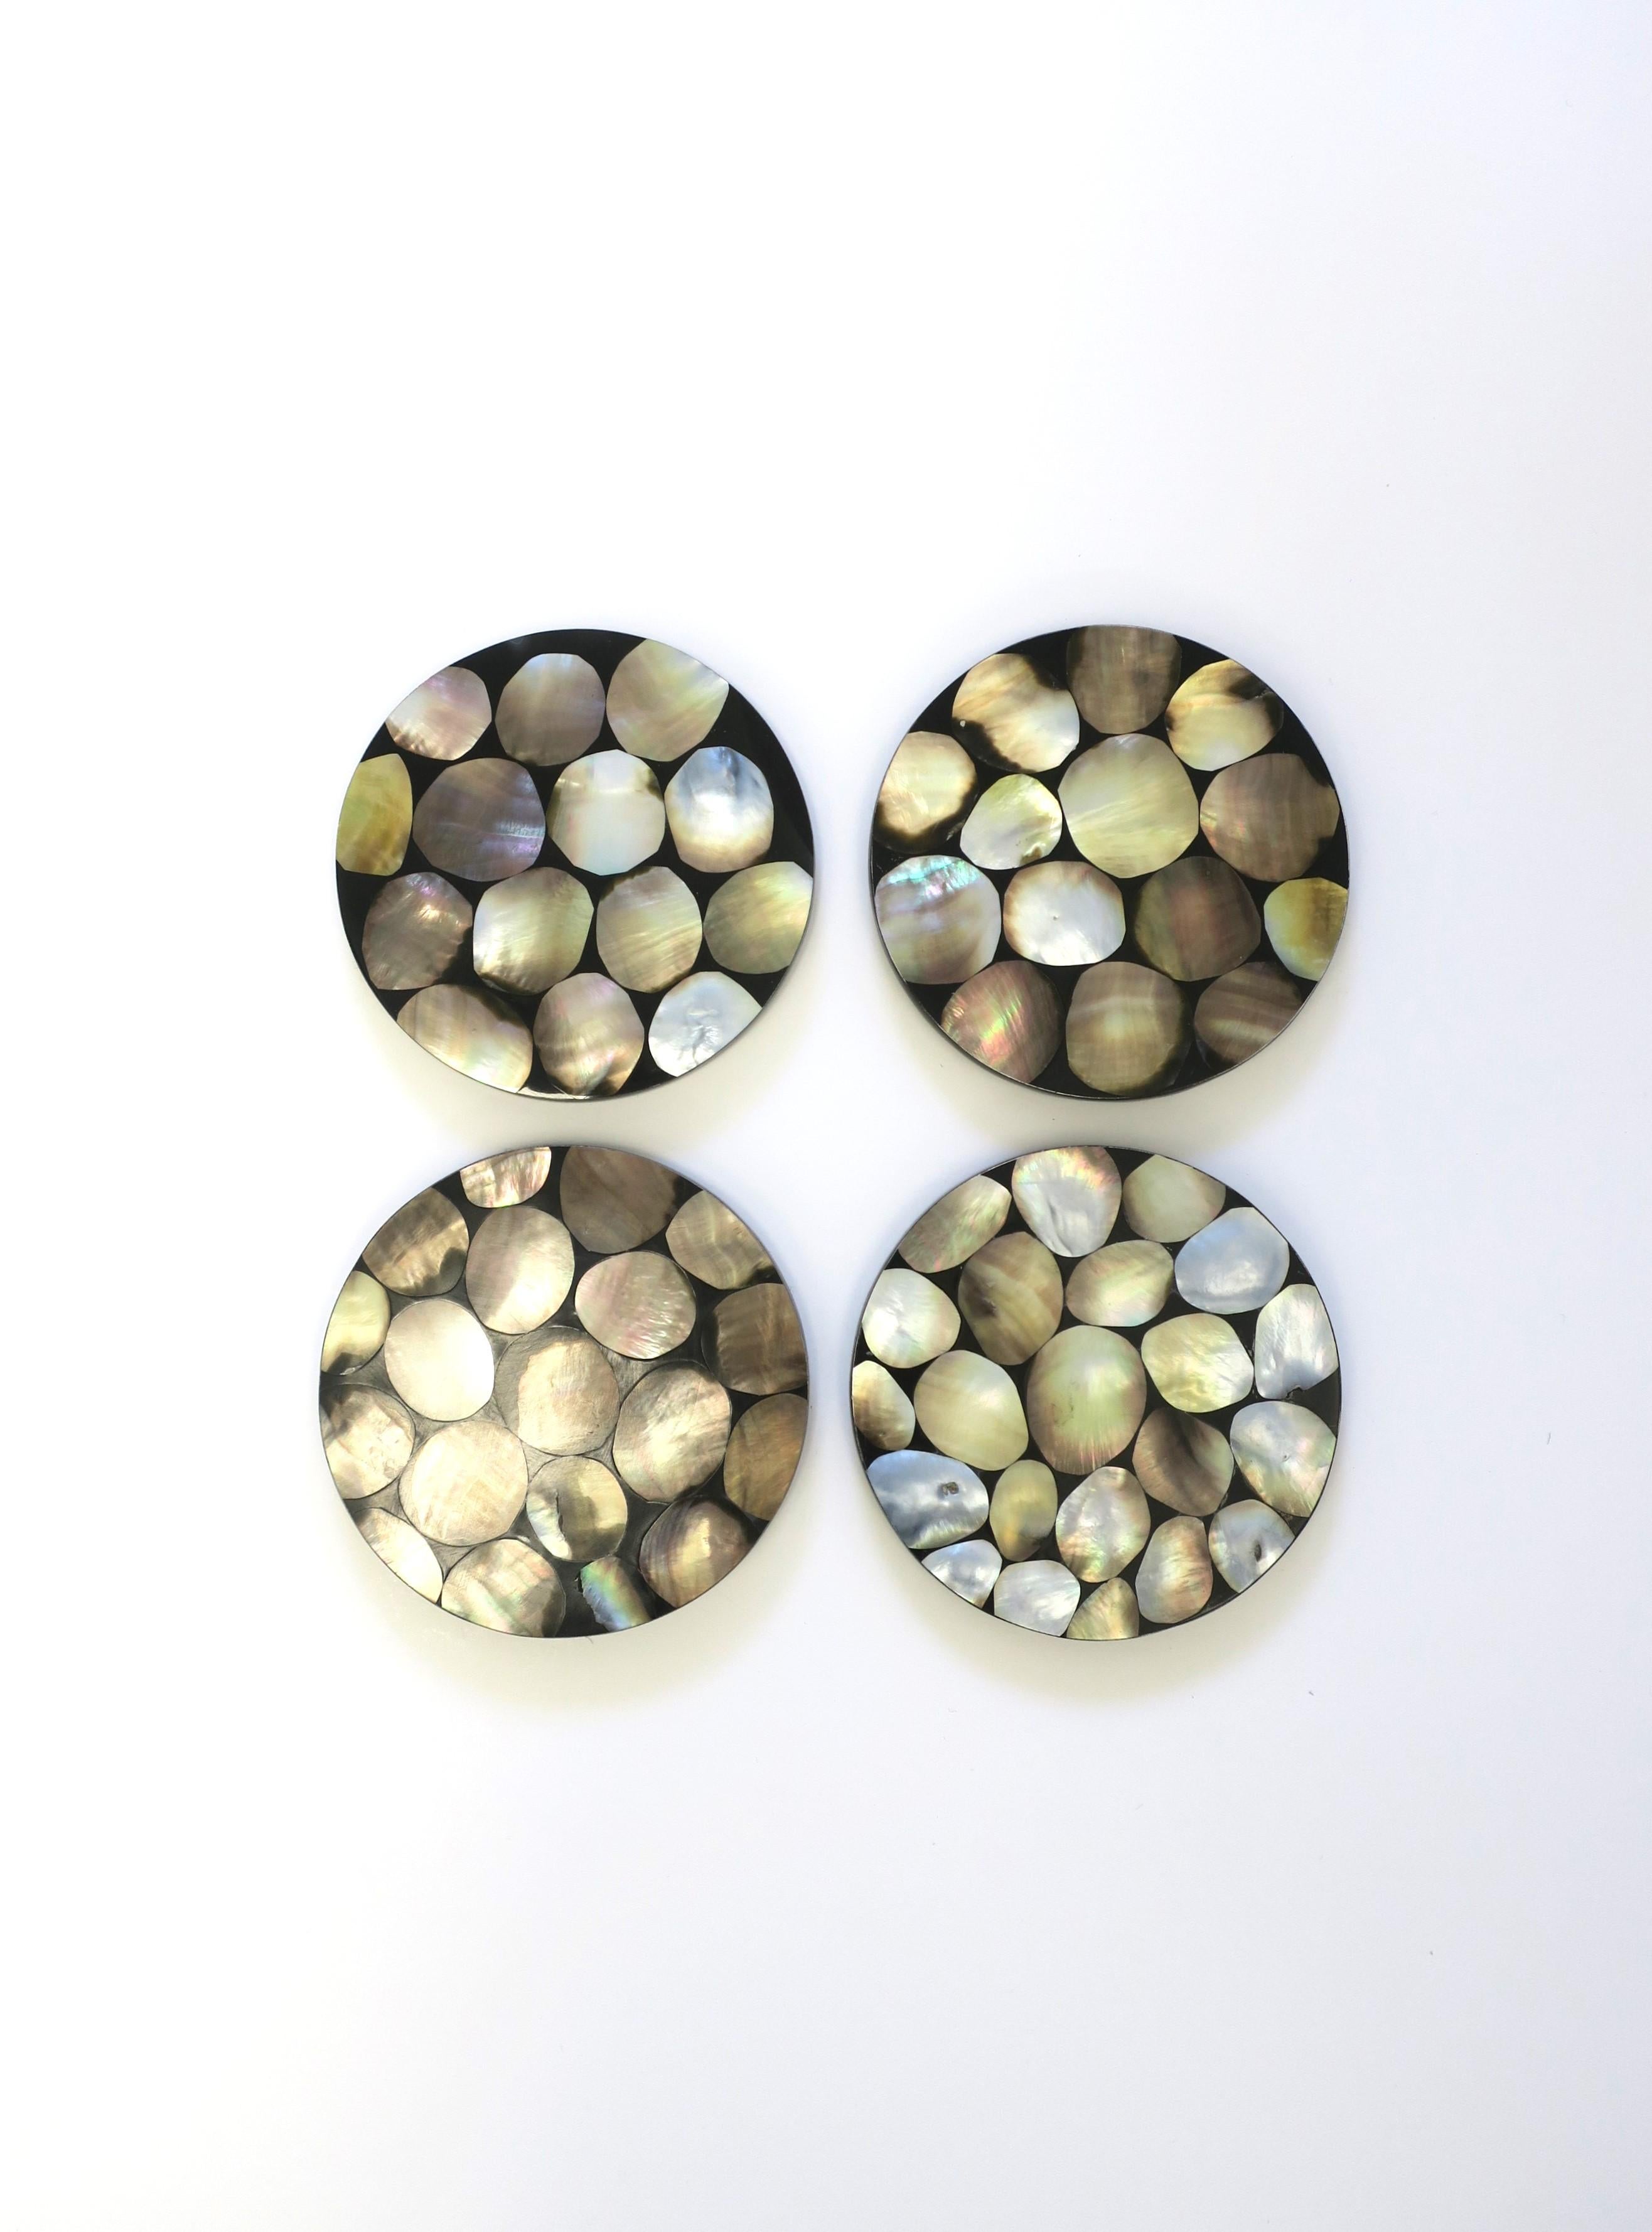 Organic Modern Abalone Seashell Cocktail Coasters by R & Y Augousti, Set of 4 For Sale